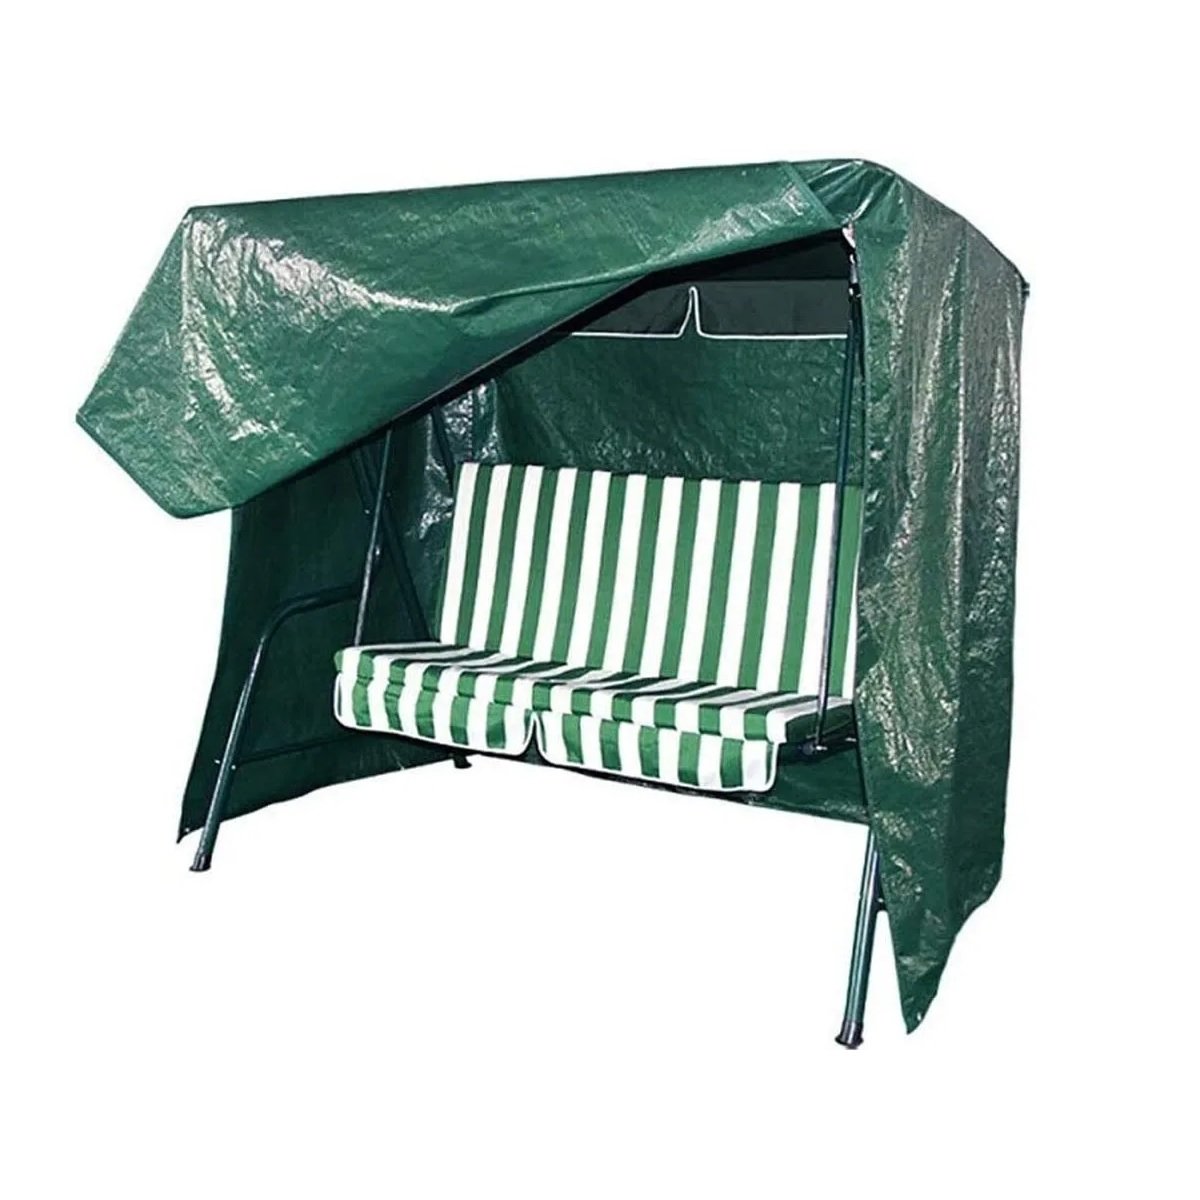 Waterproof 7ft 2.1m Garden Furniture 3 Seater Swing Bench Seat Cover